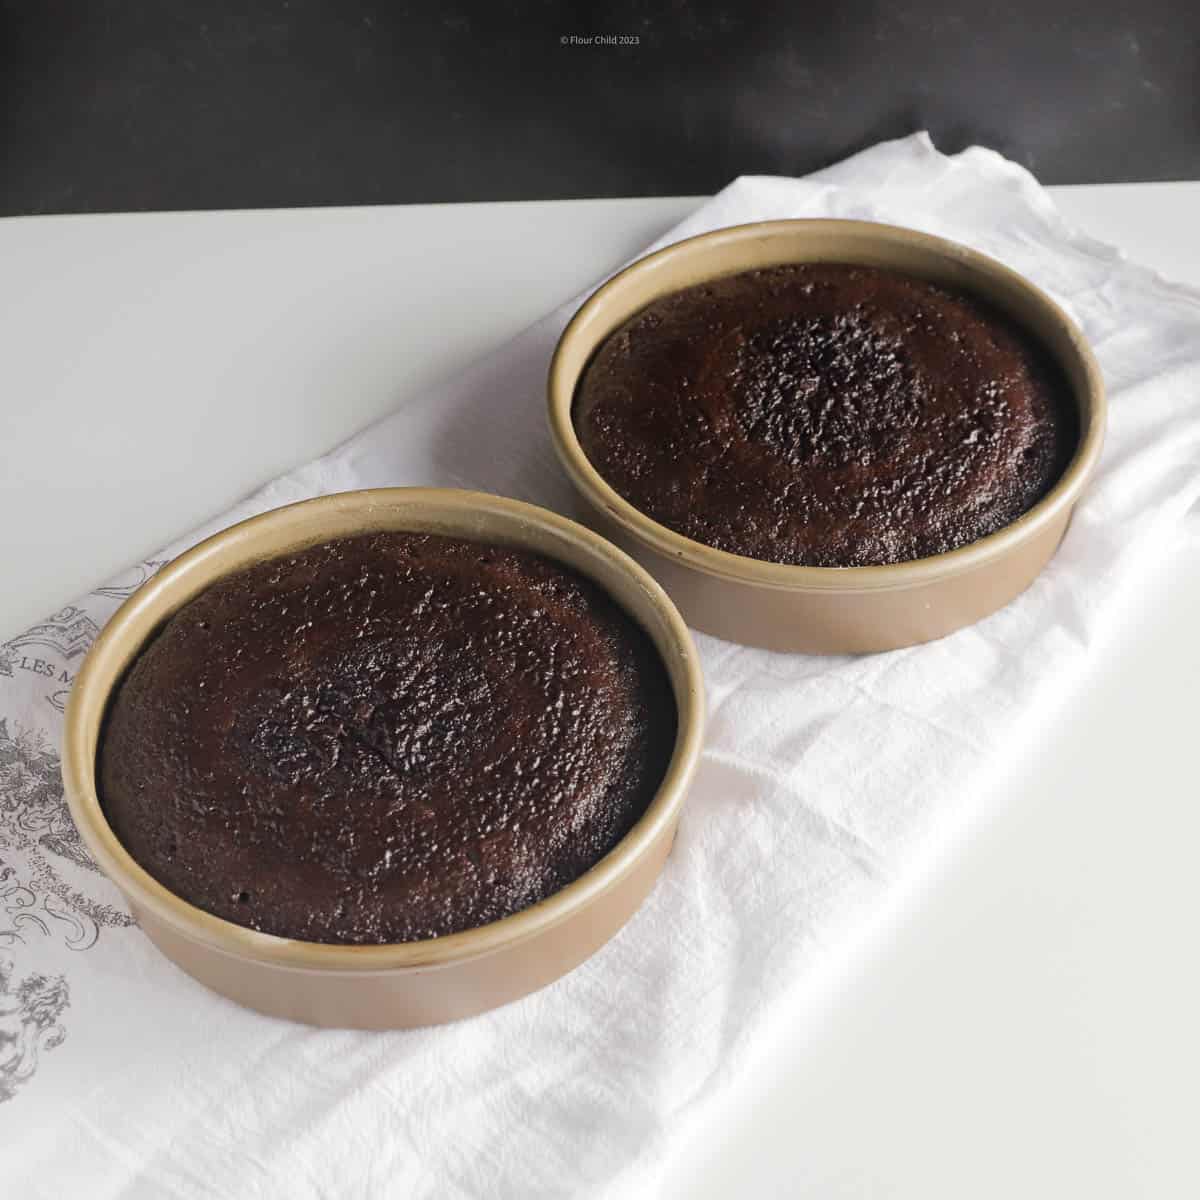 Two 8 inch round black magic cakes in cake pans, just taken out of oven.